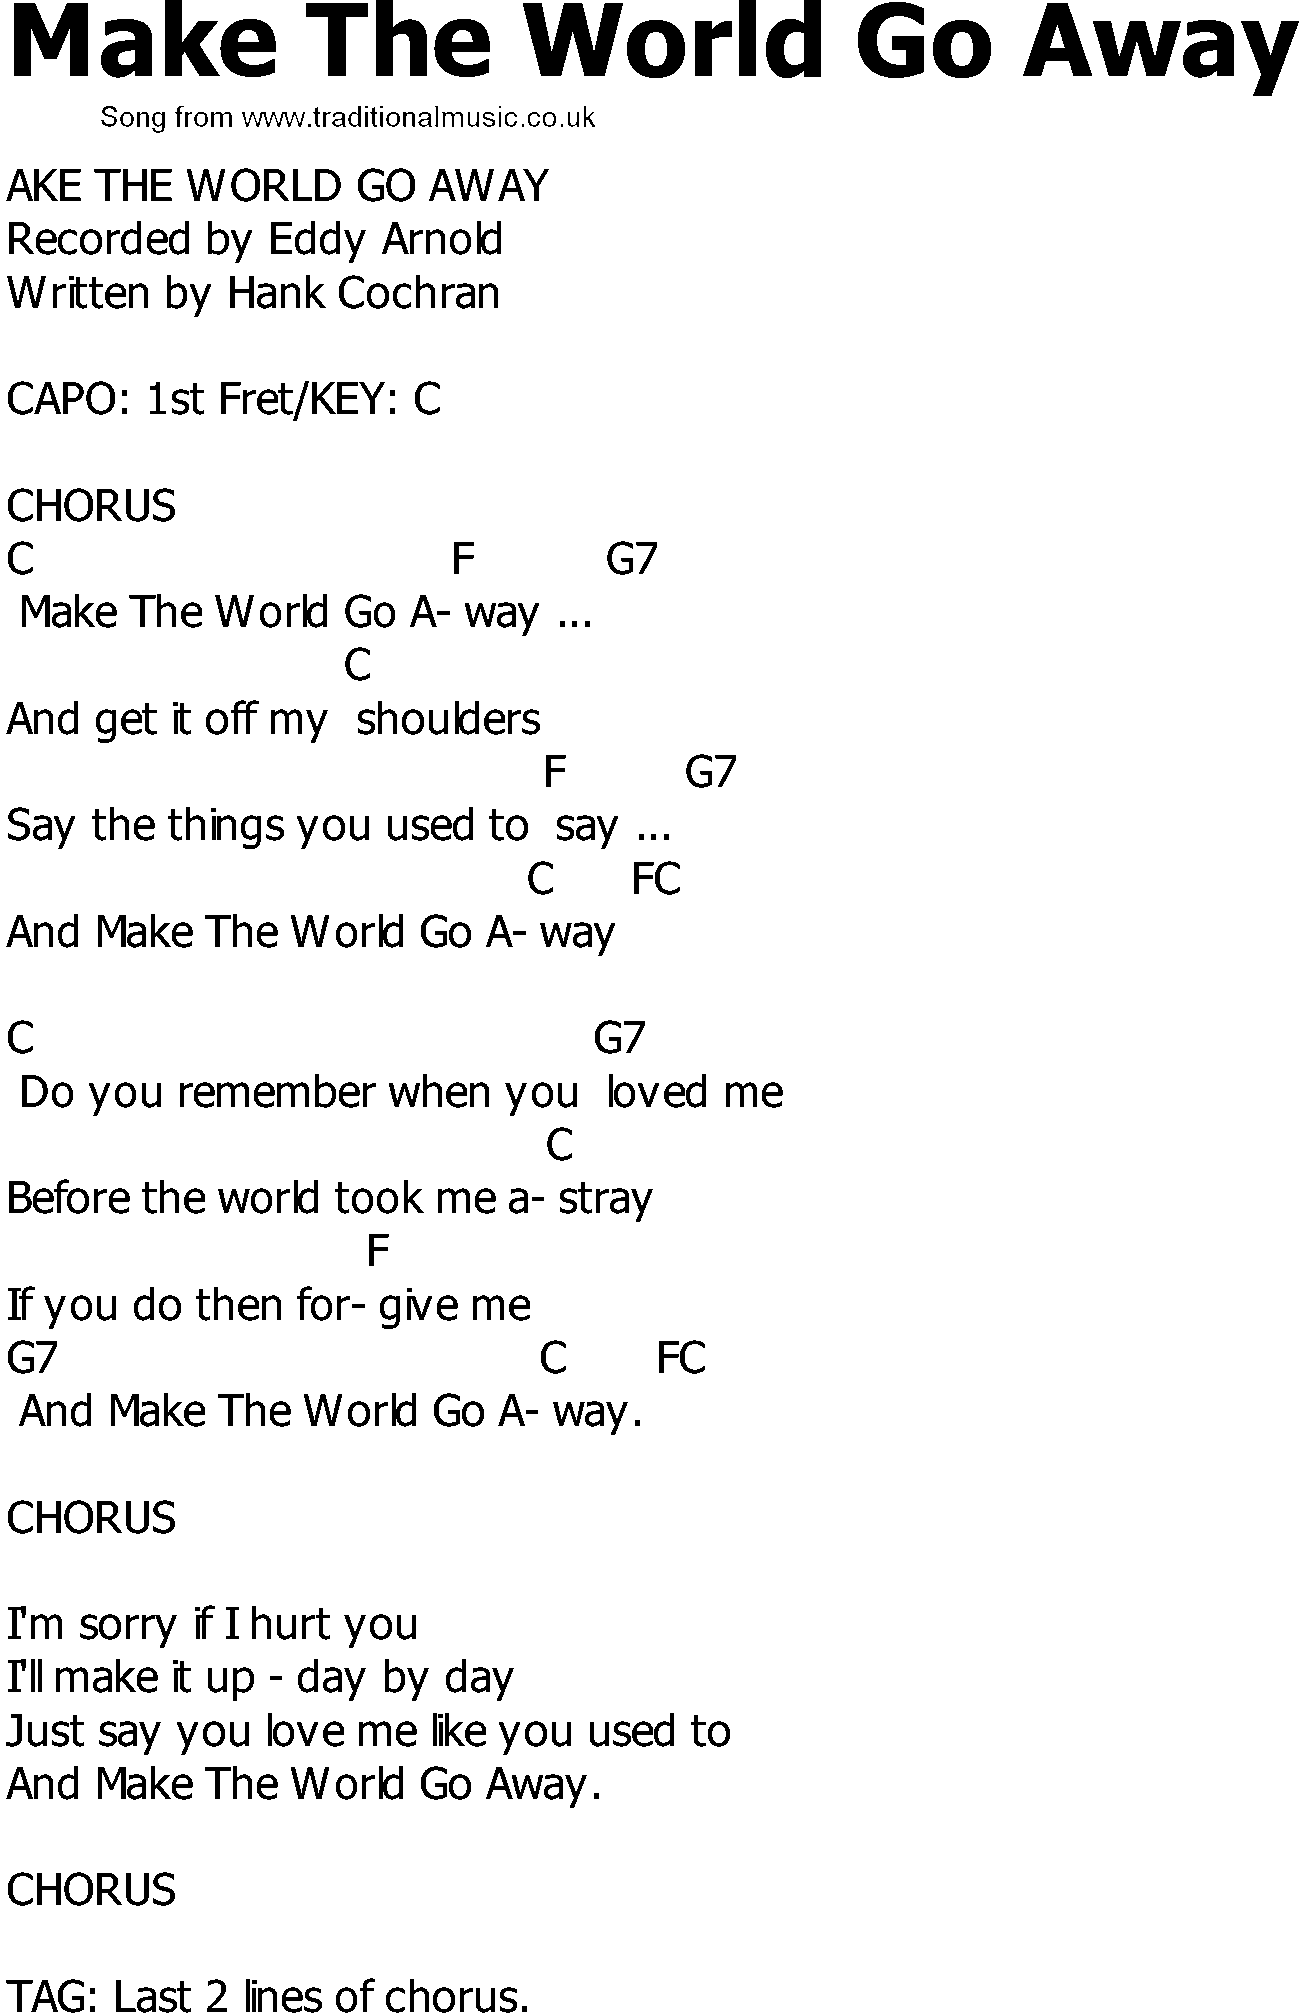 Old Country song lyrics with chords - Make The World Go Away